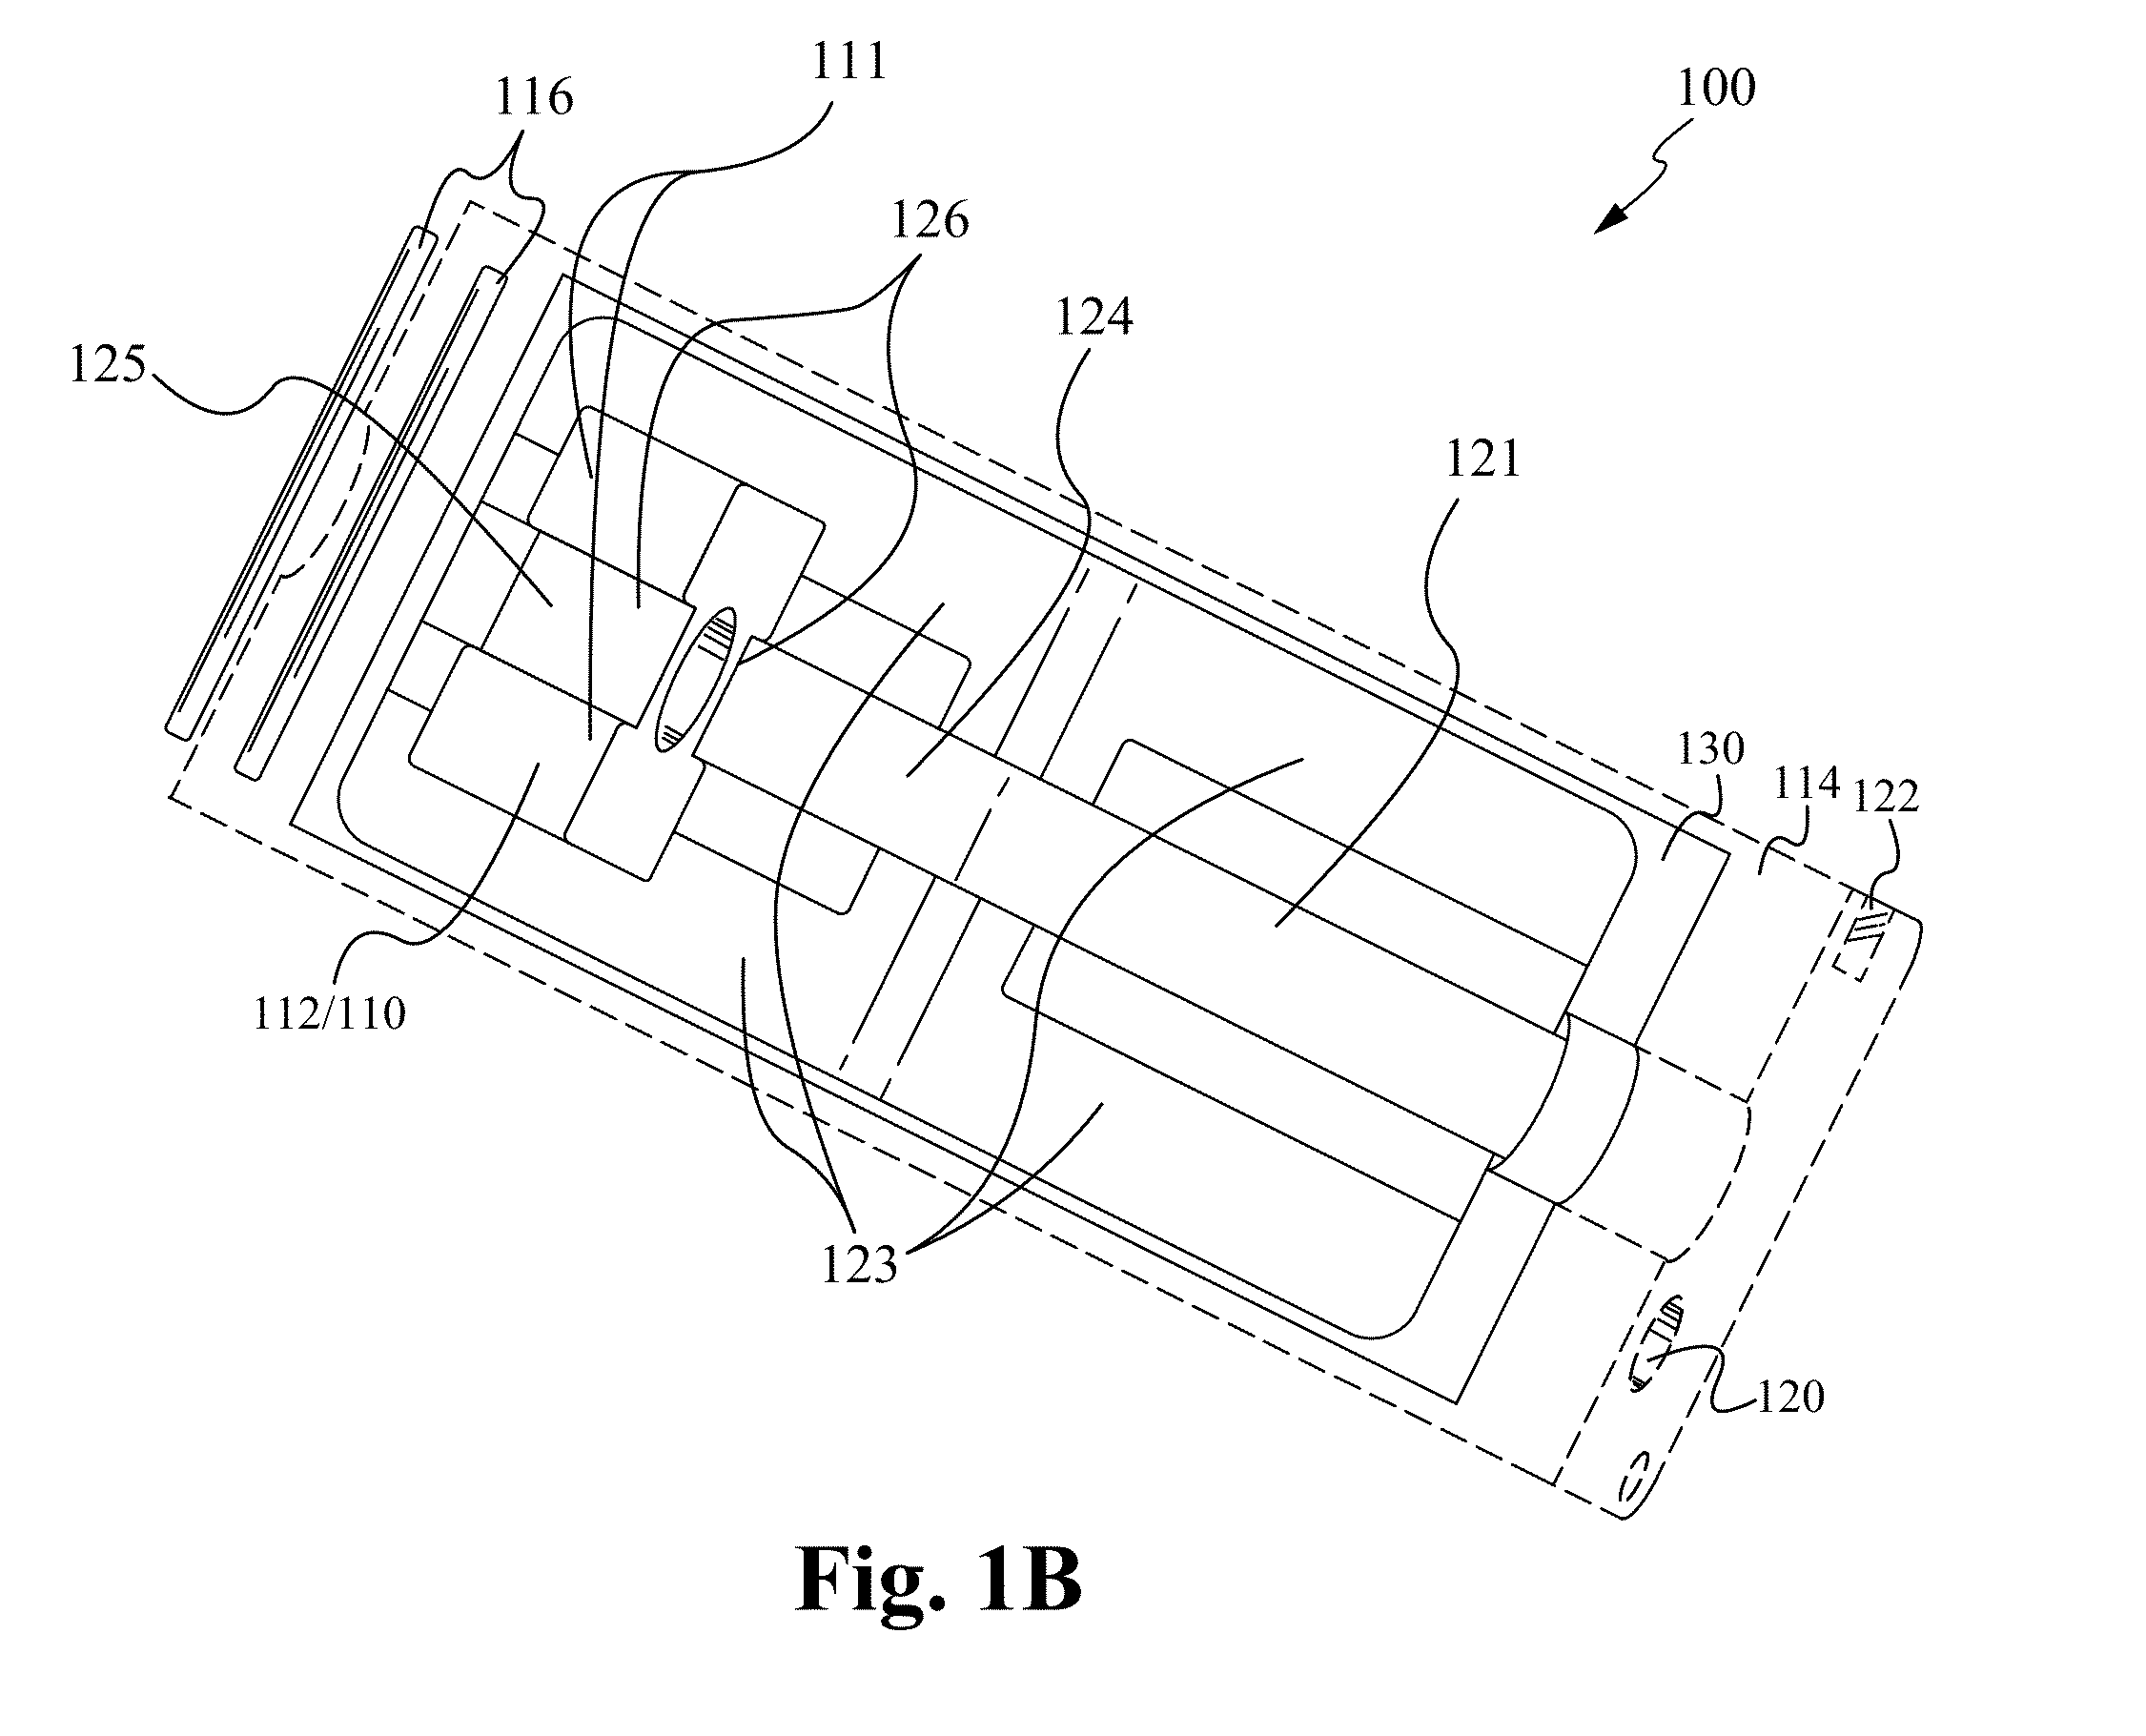 Bone fusion device, system and method